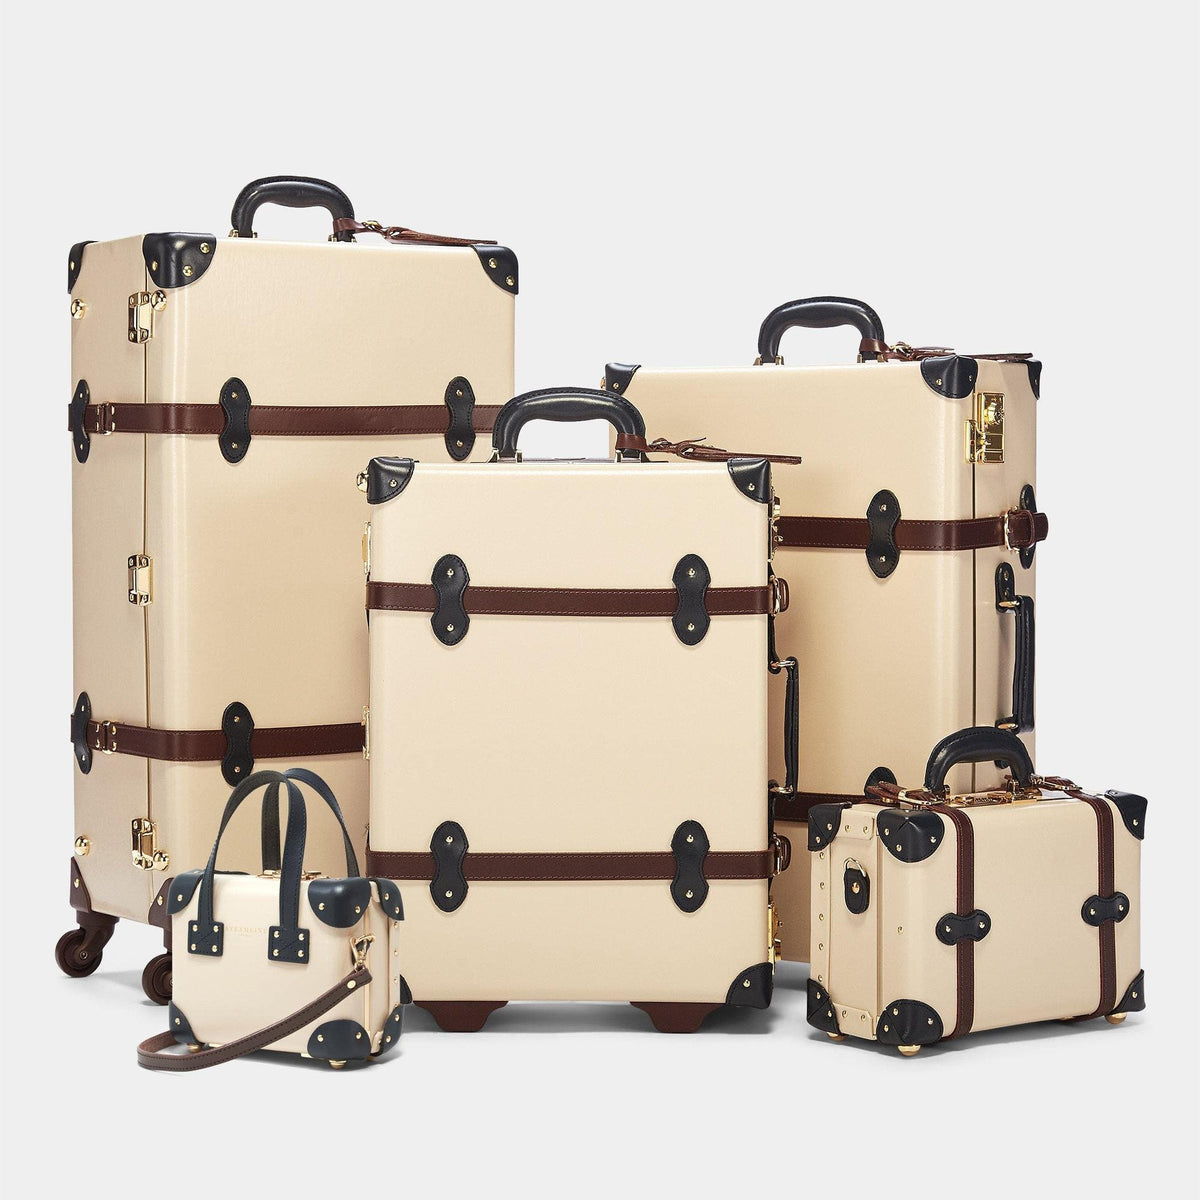 The Architect - Cream Carryon Carryon Steamline Luggage 